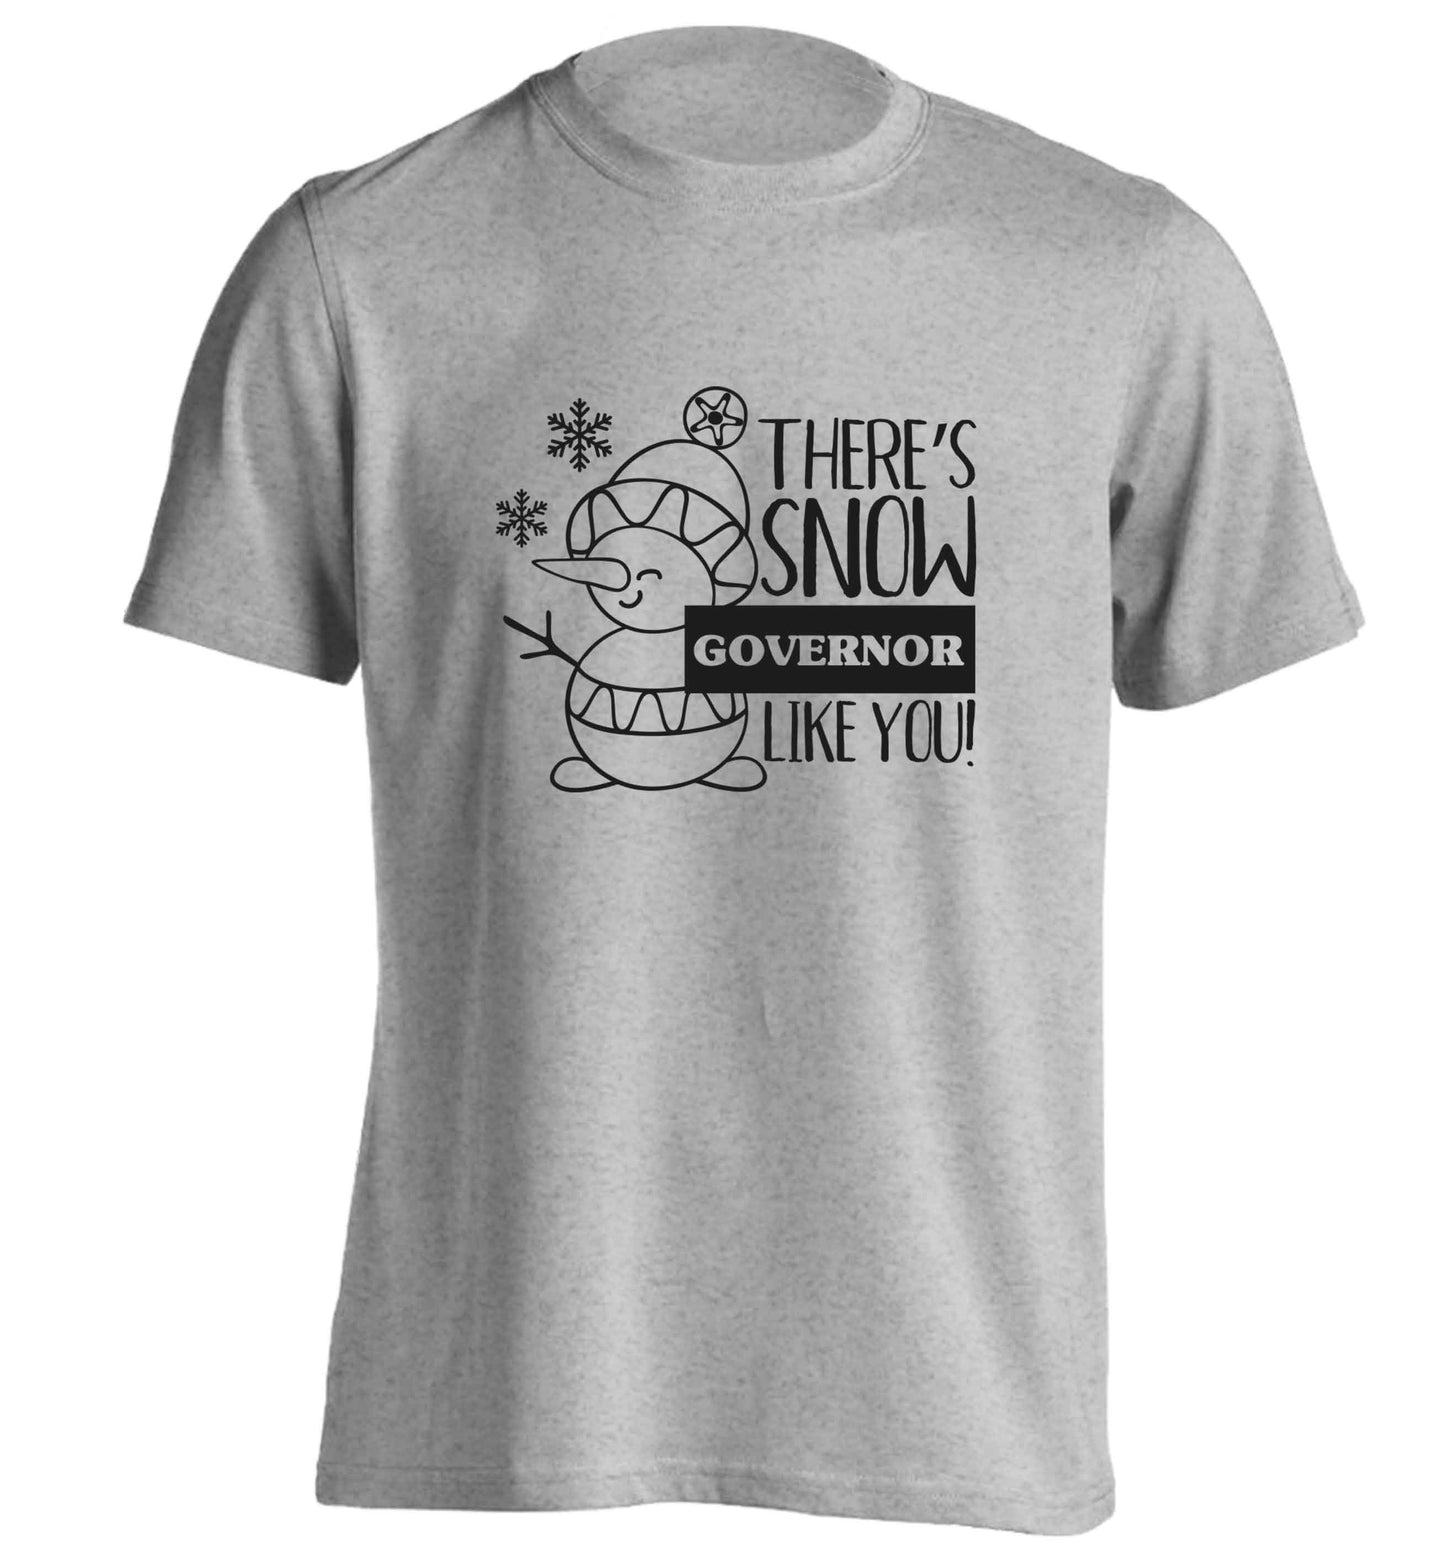 There's snow governor like you adults unisex grey Tshirt 2XL